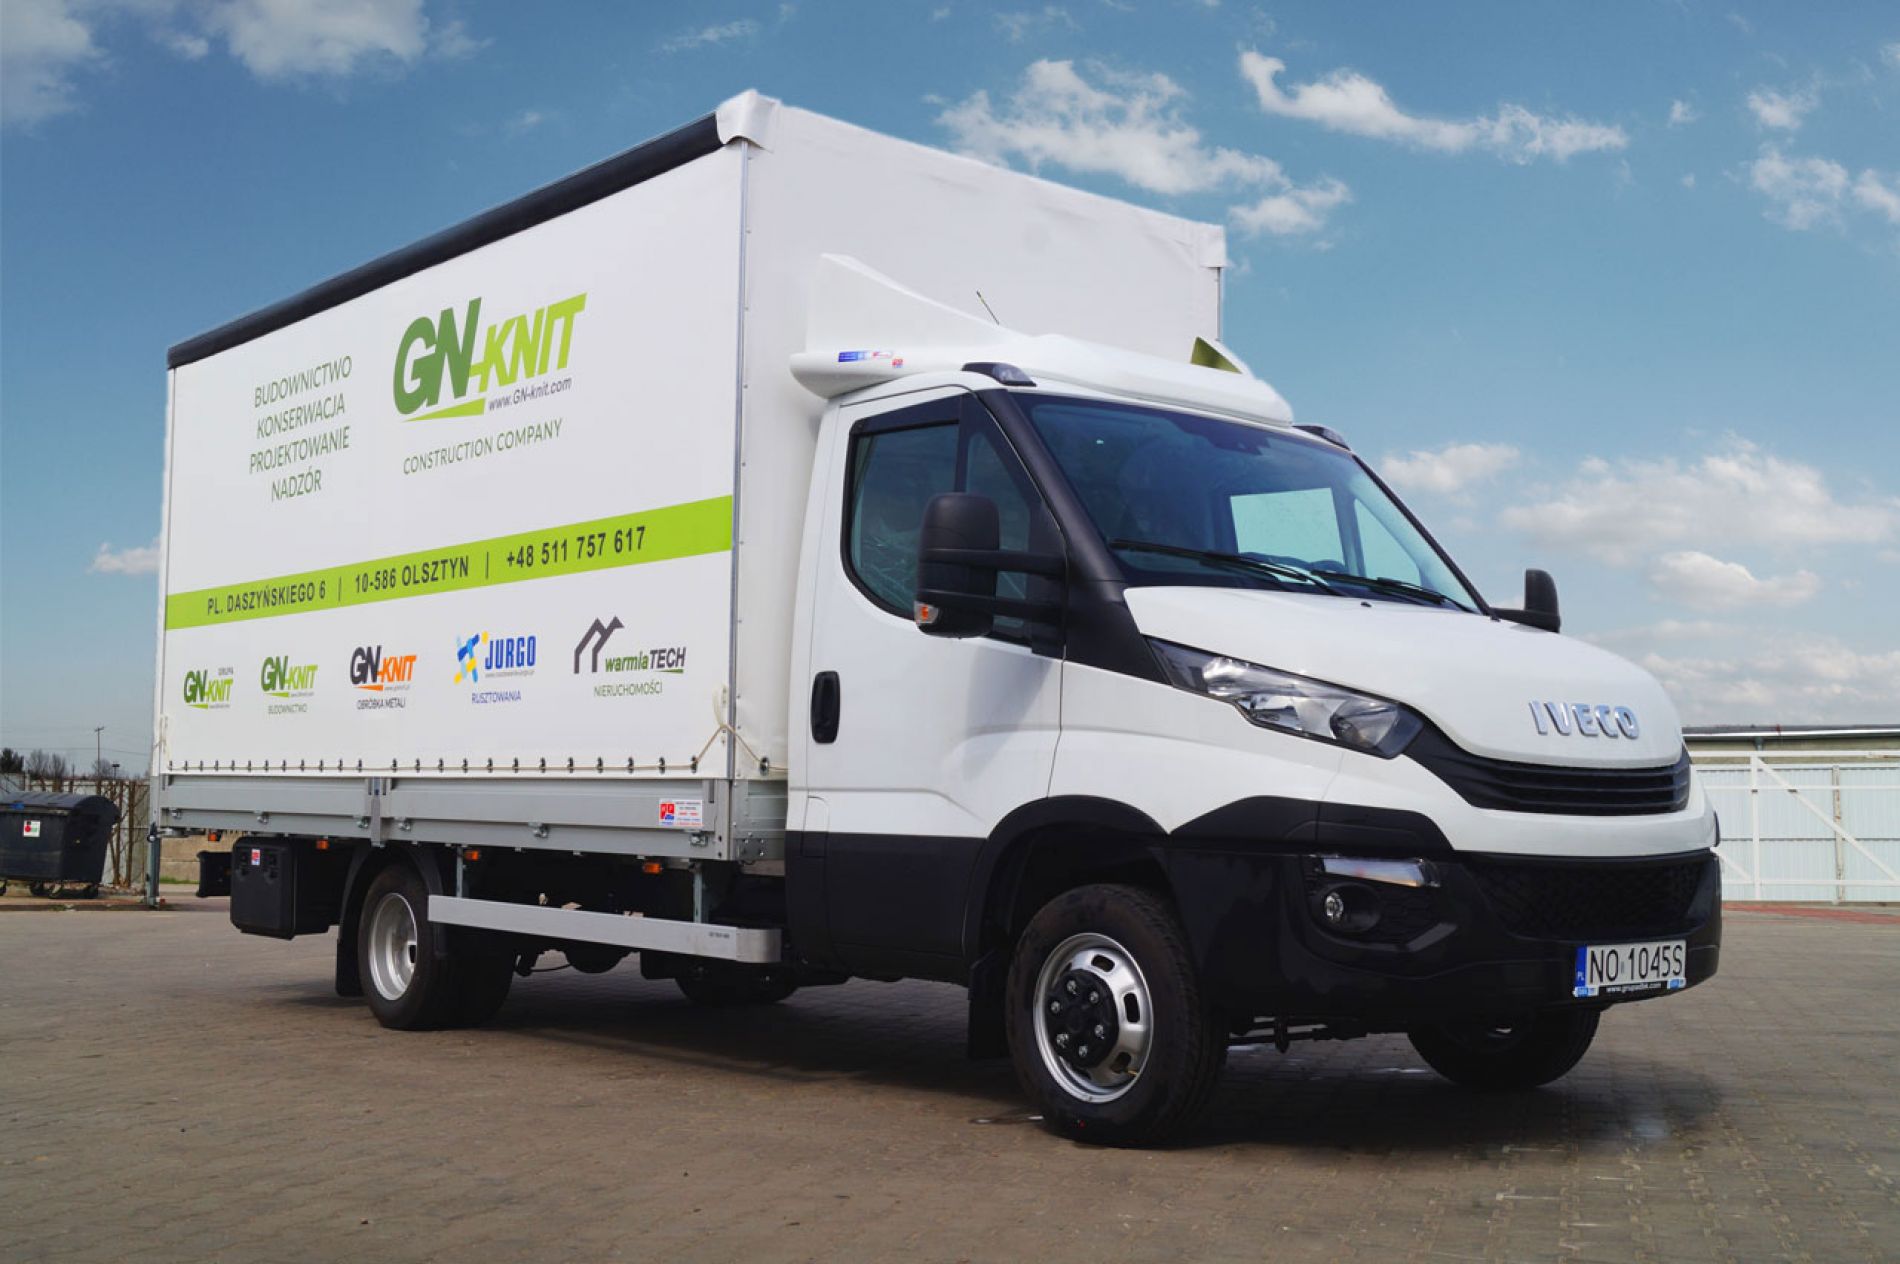 Nowe Iveco Daily dla Gn-Knit 